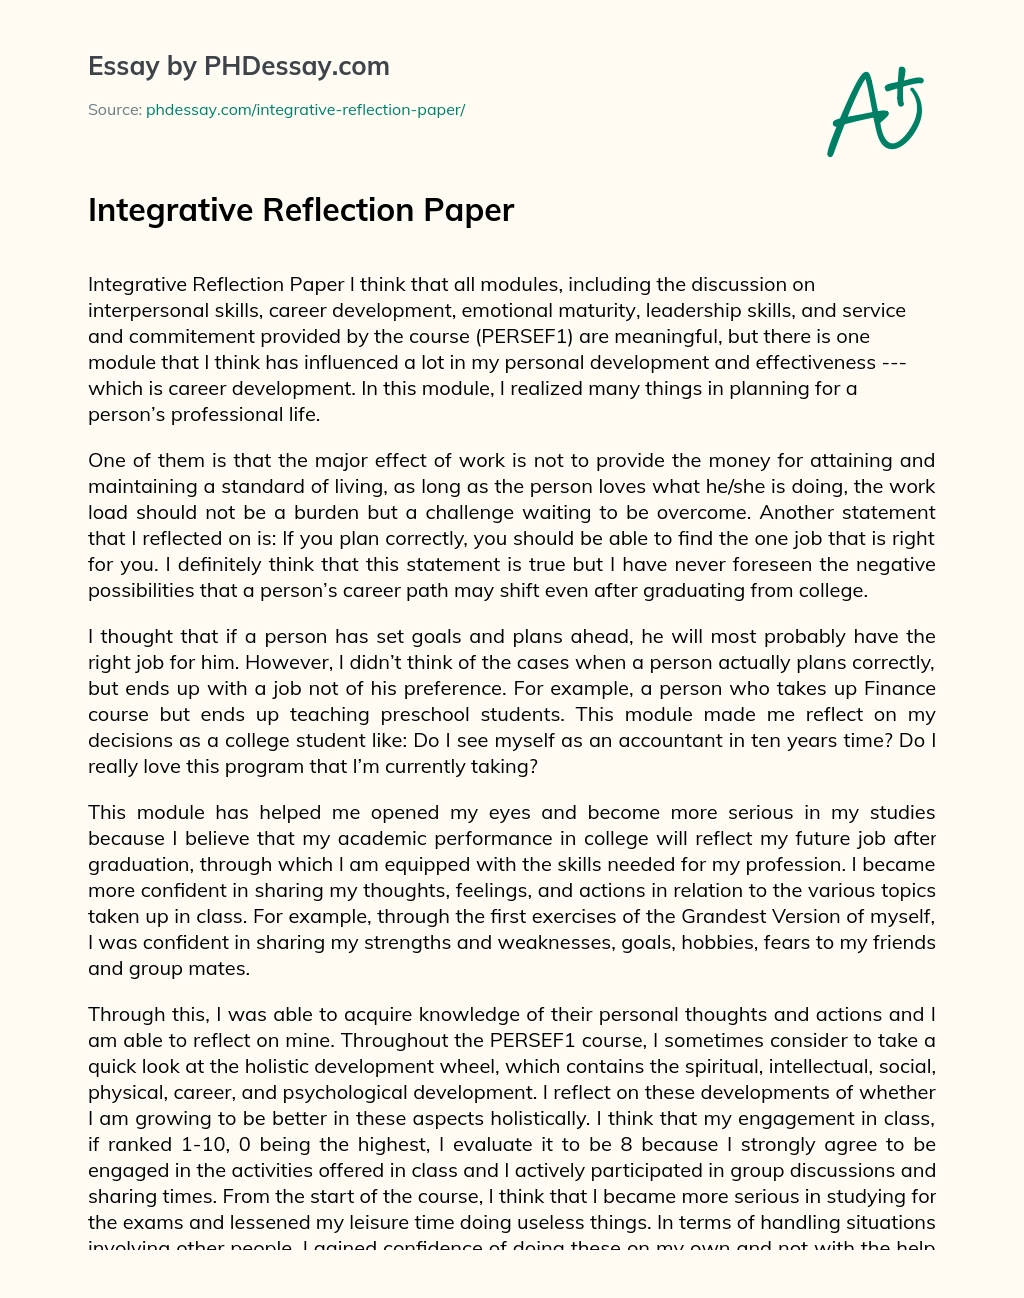 Reflection Paper / The Rise Of How To Make A Good Reflection Paper - So what makes a perfect reflection paper?